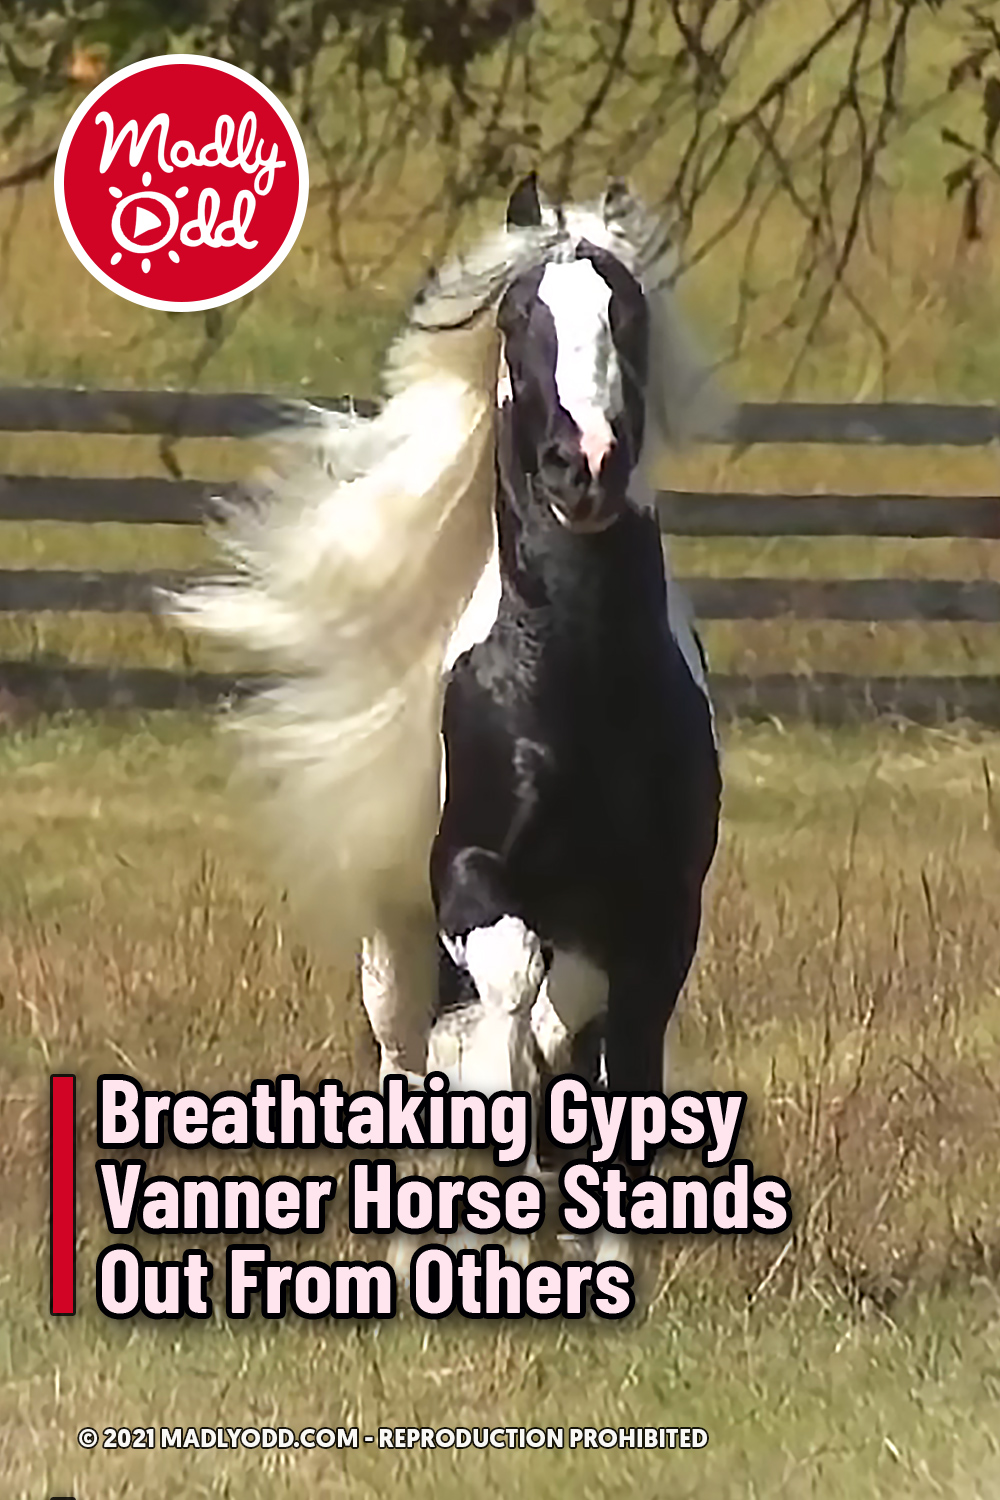 Breathtaking Gypsy Vanner Horse Stands Out From Others